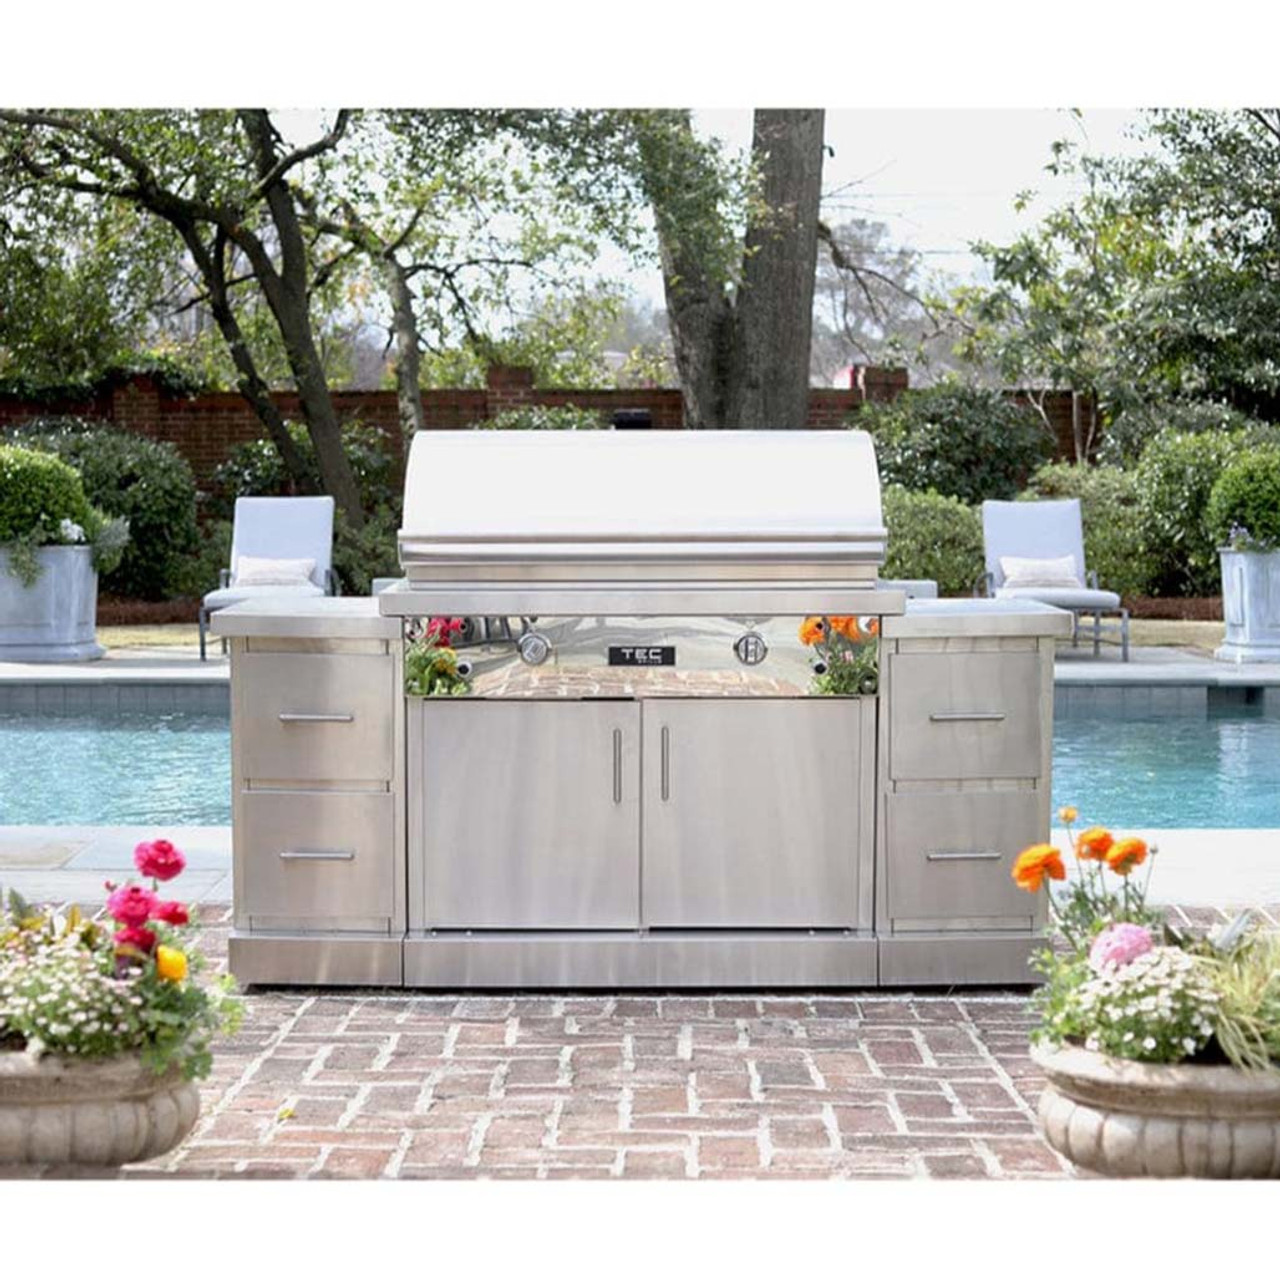 https://cdn11.bigcommerce.com/s-5rzebitmg/images/stencil/1280x1280/products/3102/34027/tec-grills-44-sterling-patio-fr-infrared-gas-grill-on-stainless-steel-island-29613876052086_1200x__37932.1689112419.jpg?c=2